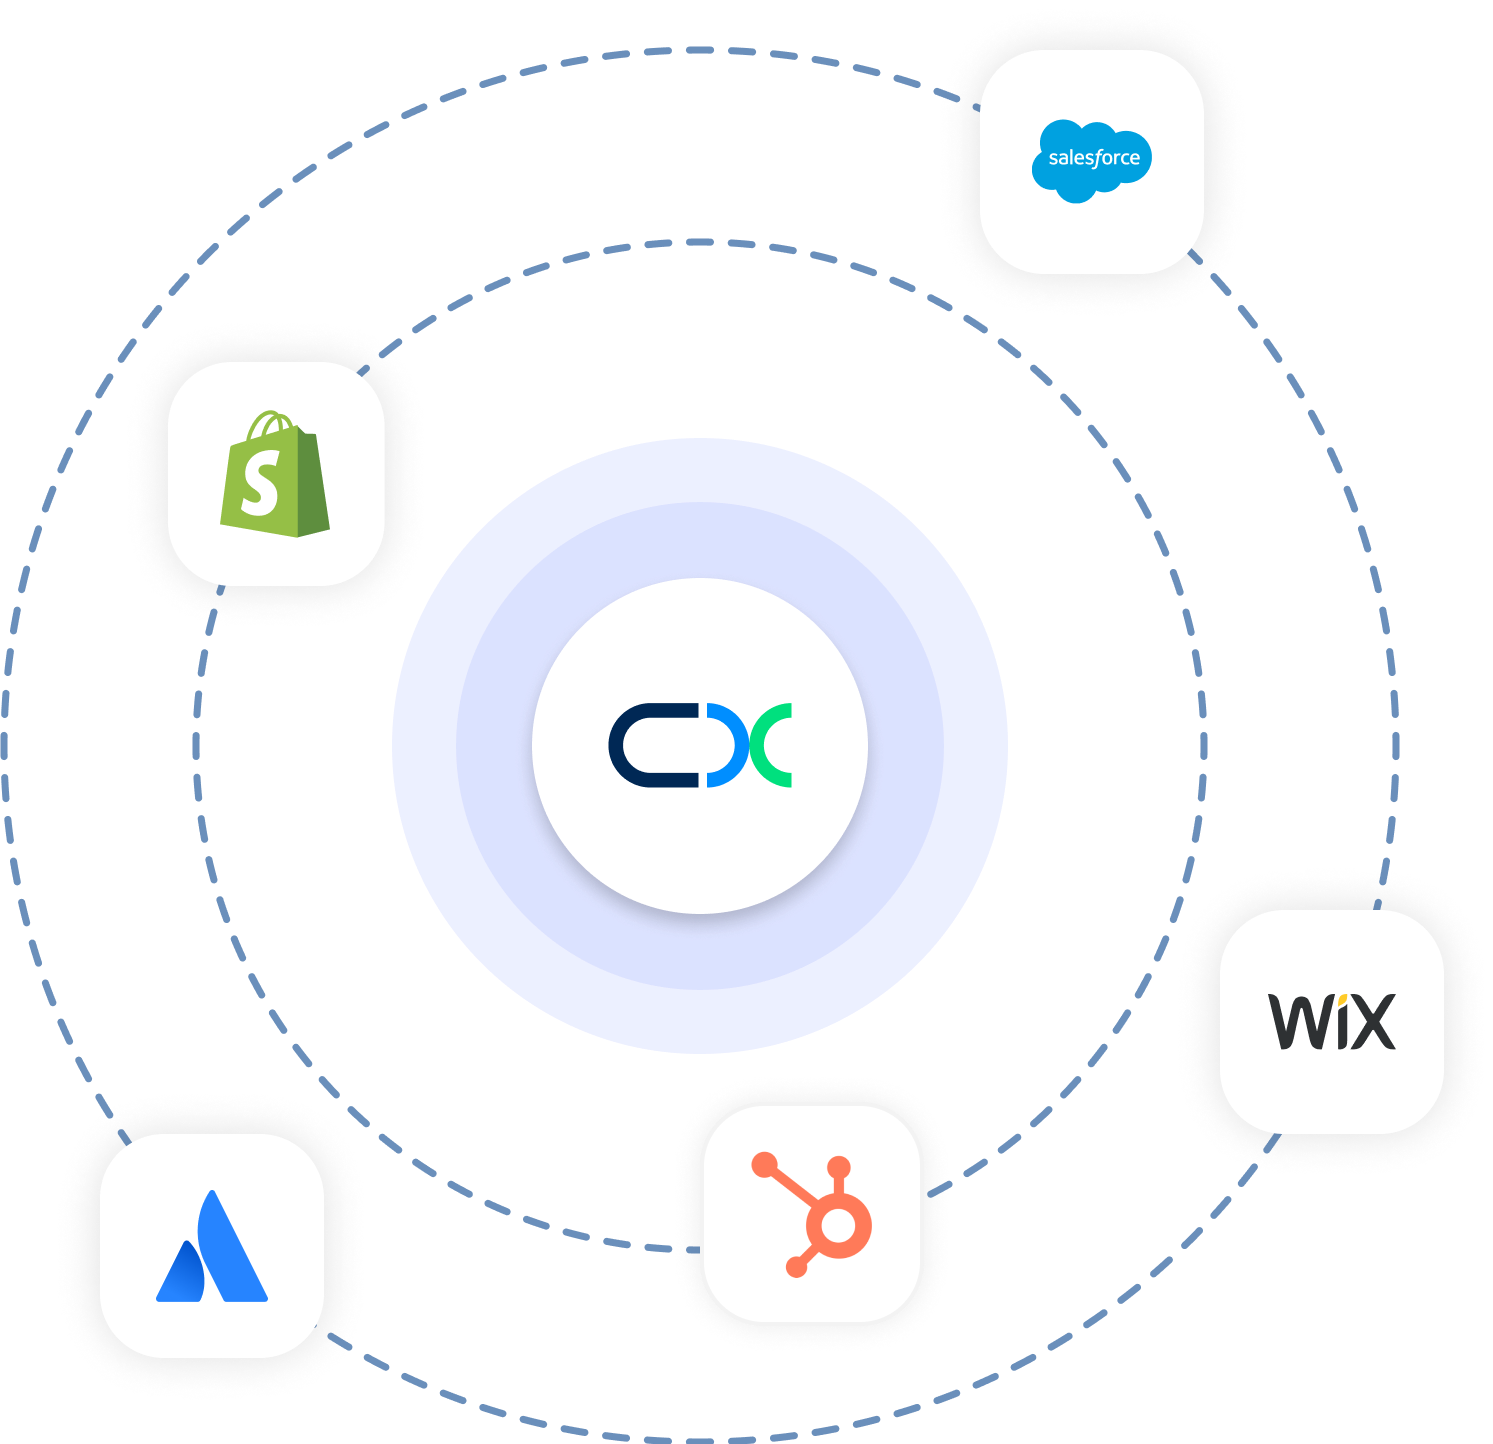 An accessible integration ecosystem with API - CINNOX